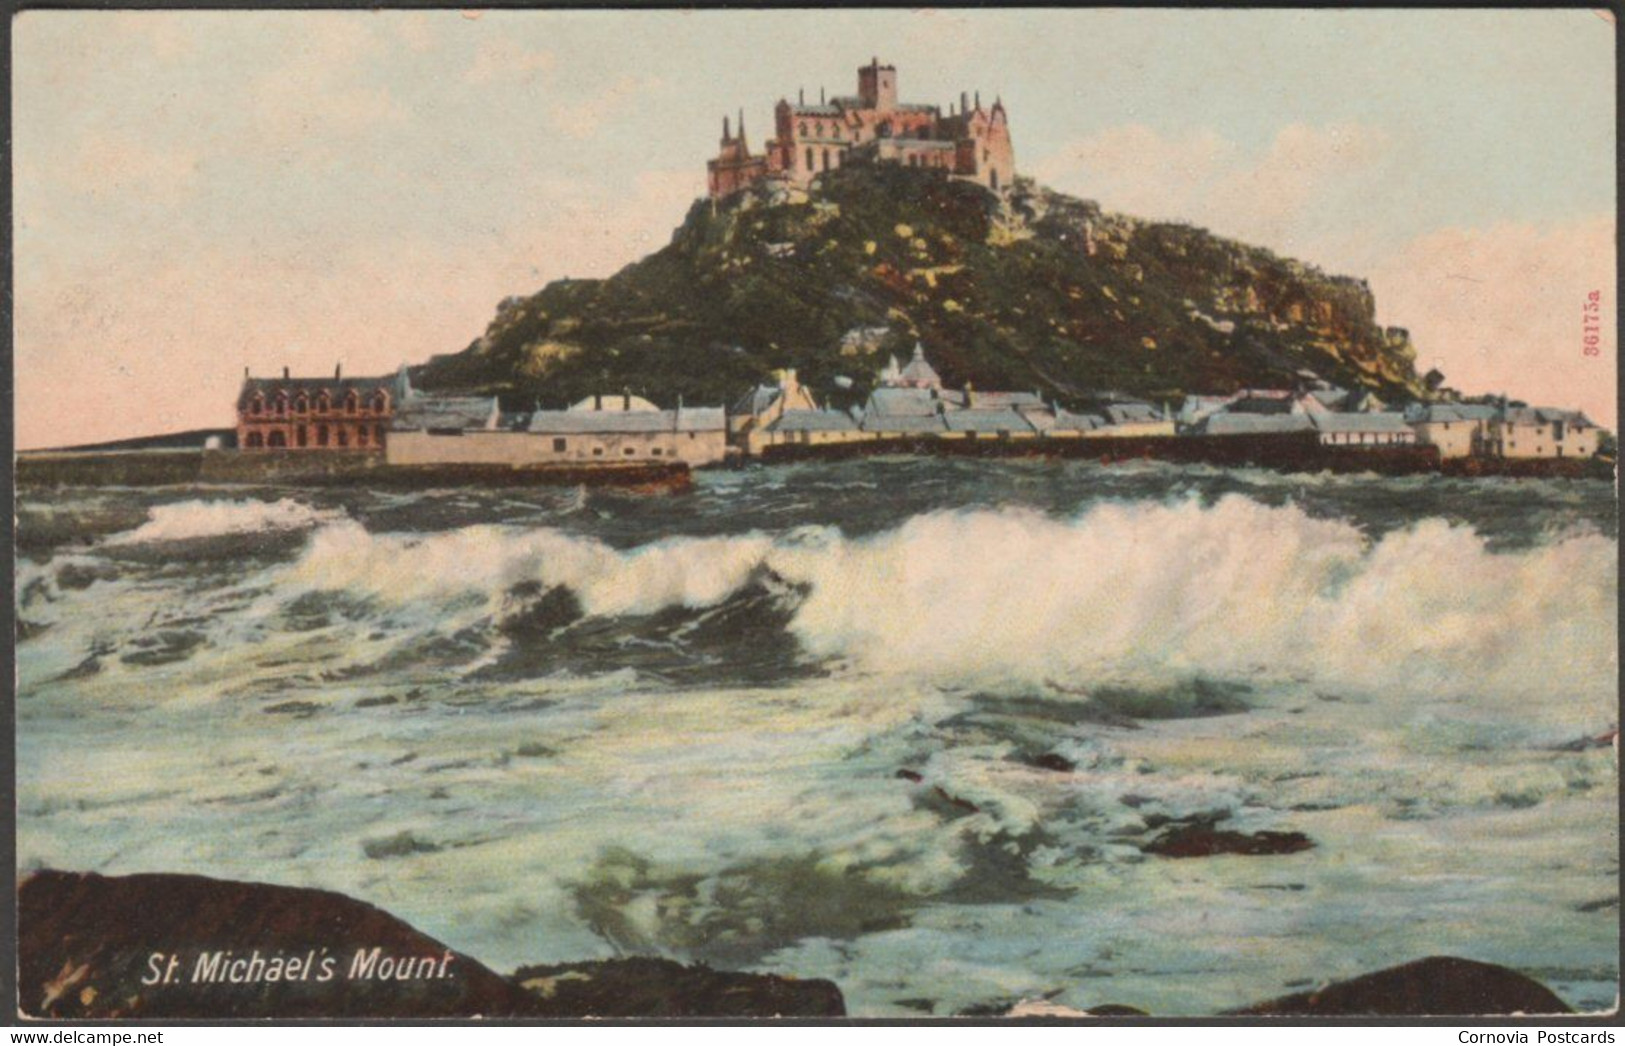 St Michael's Mount, Cornwall, 1911 - Frith's Postcard - St Michael's Mount